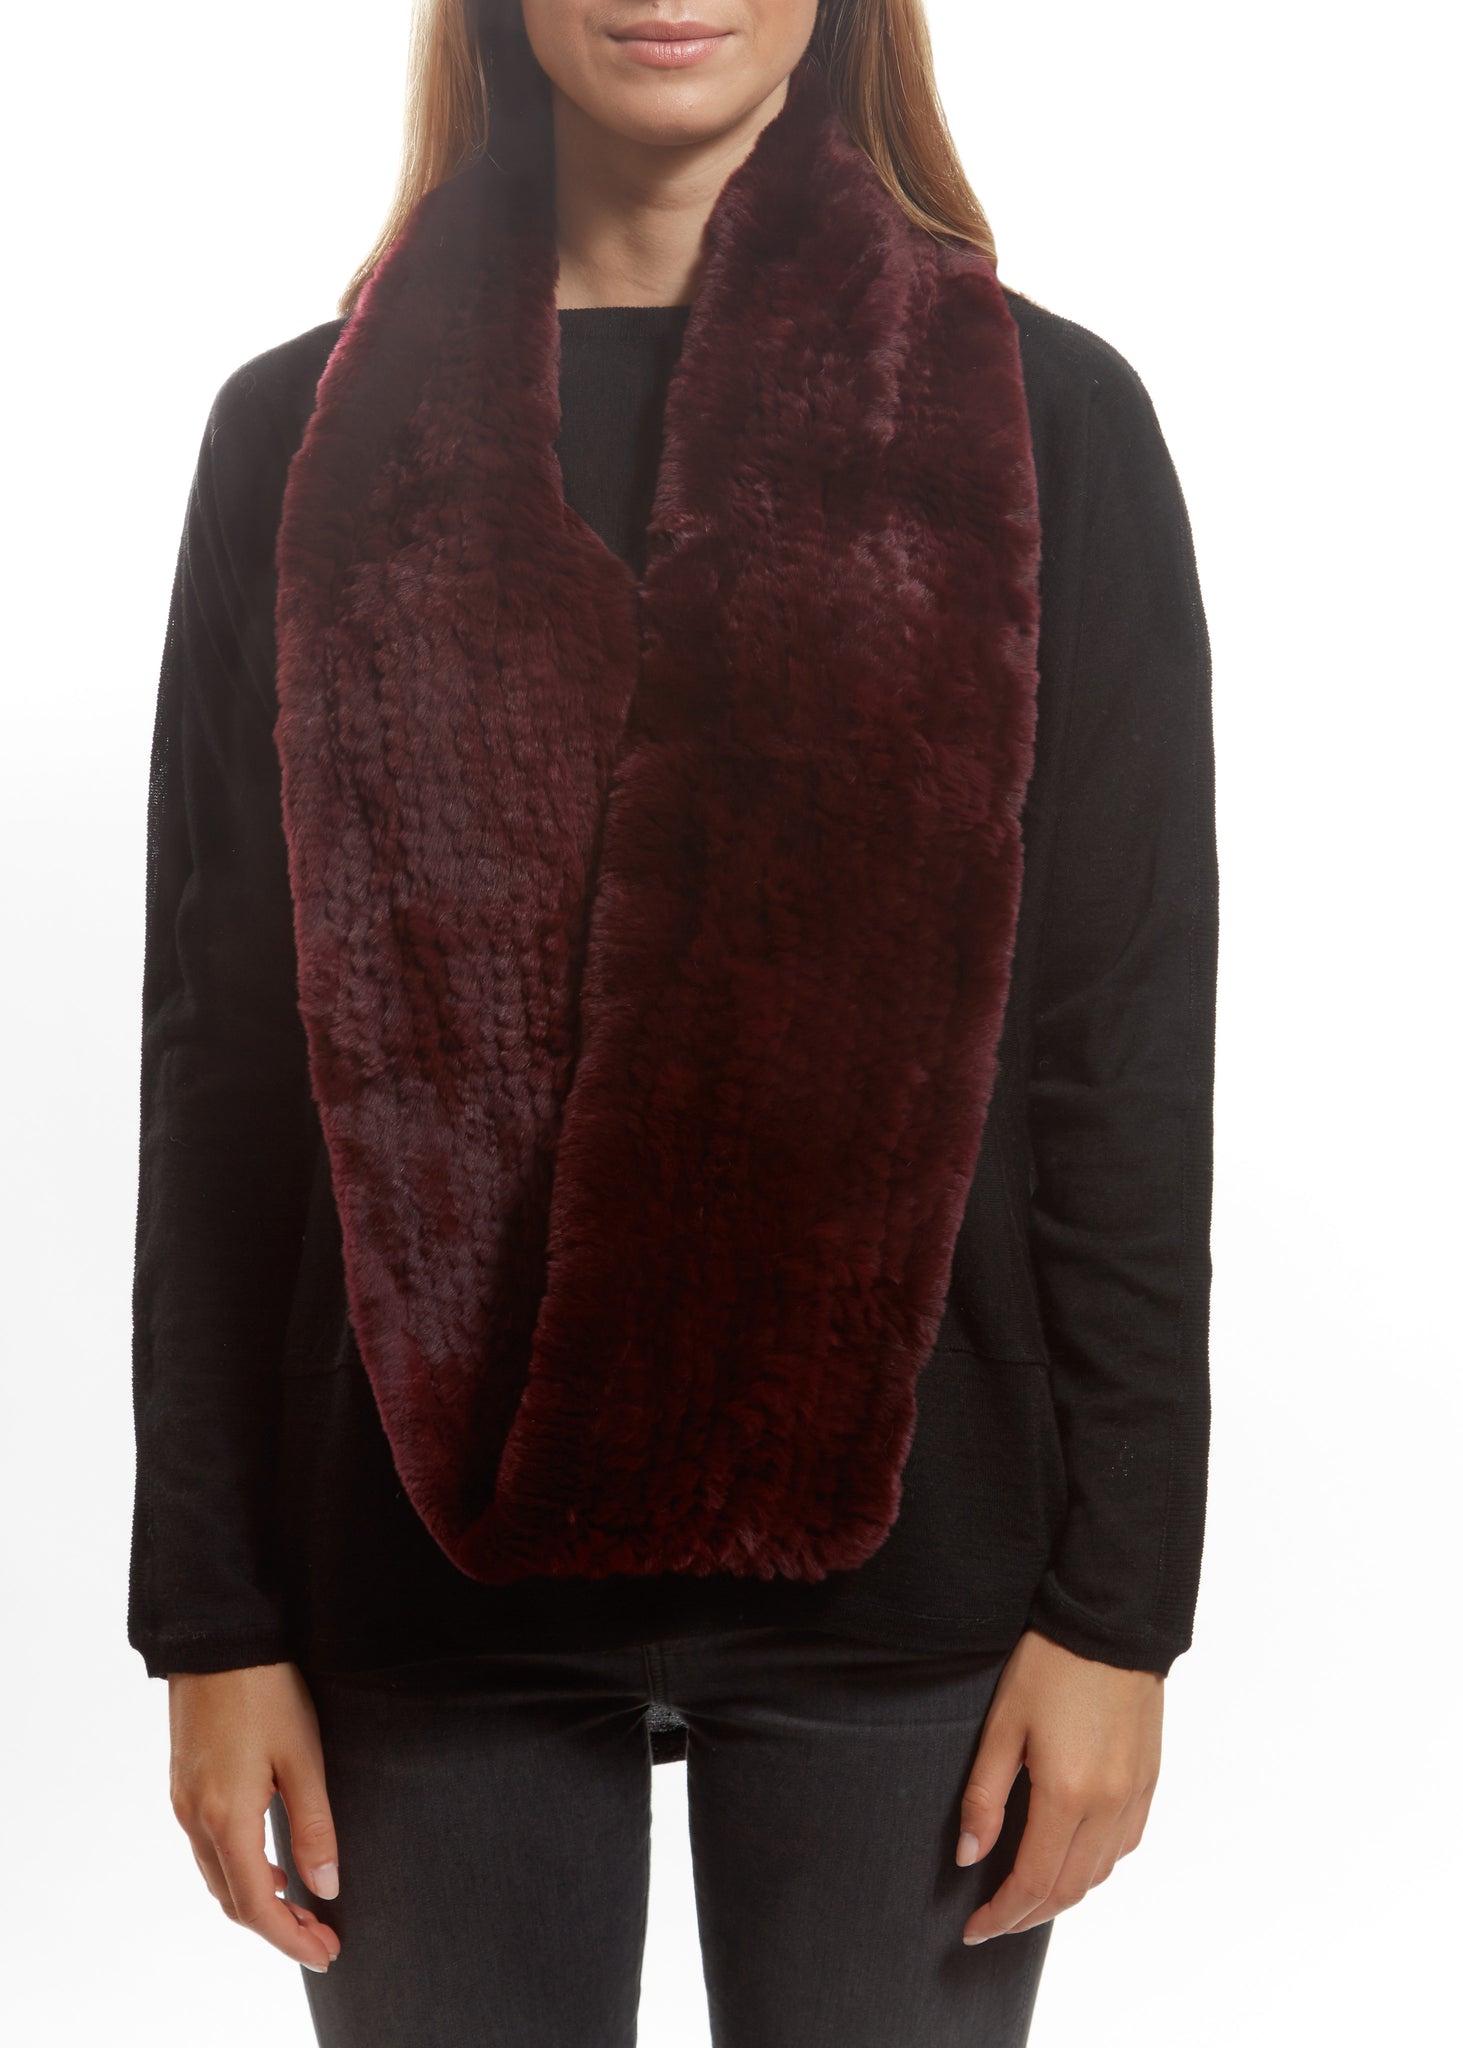 Burgundy Knitted Rabbit Double Snood With Fur Trim - Jessimara